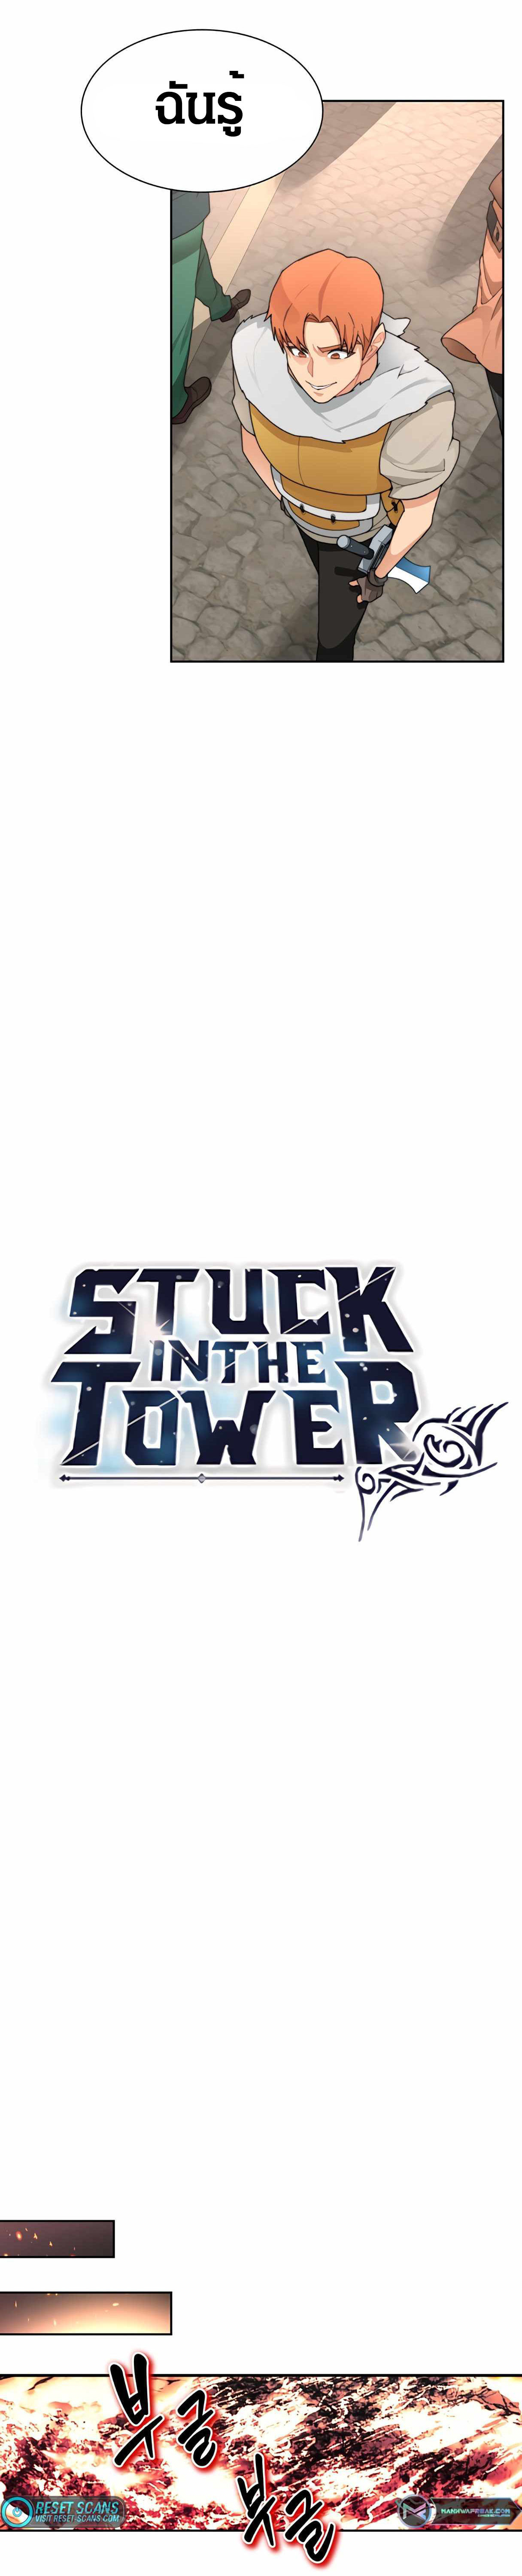 STUCK IN THE TOWER 23 12